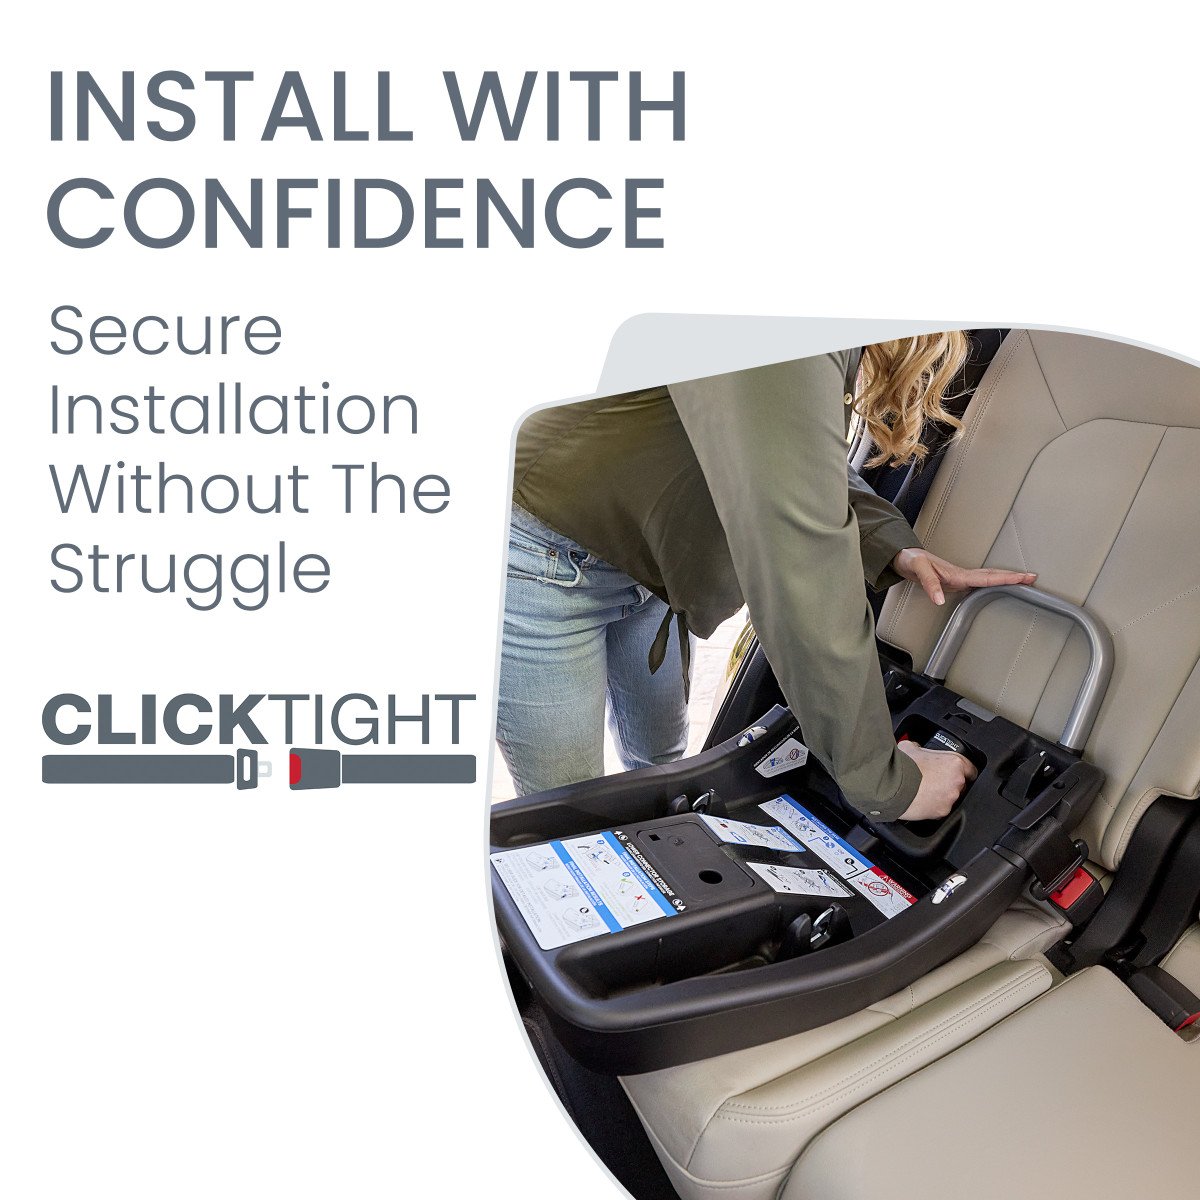 Mother Installing Infant Car Seat Base using ClickTight Technology (Copy)